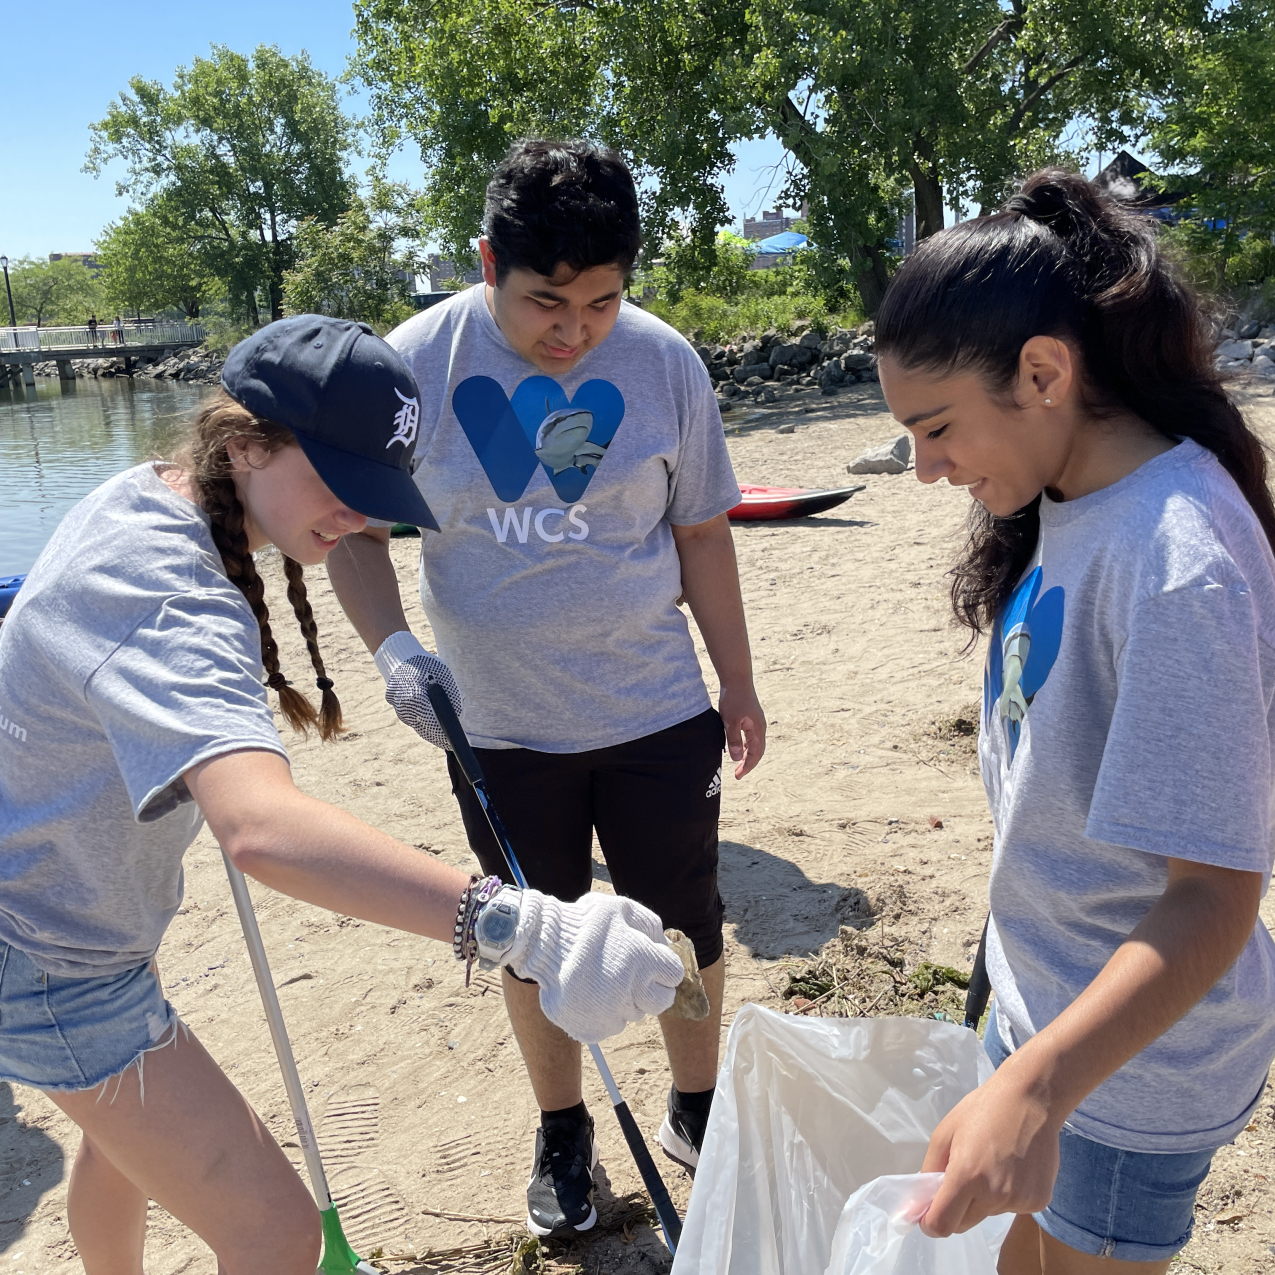 Three people are standing outside participating in a beach clean-up. The person on the right is holding a garbage bag open while the other two people are holding an object grabber. The person on the left is putting something into the garbage back with their gloved hand. In the background, there are trees and a body of water.